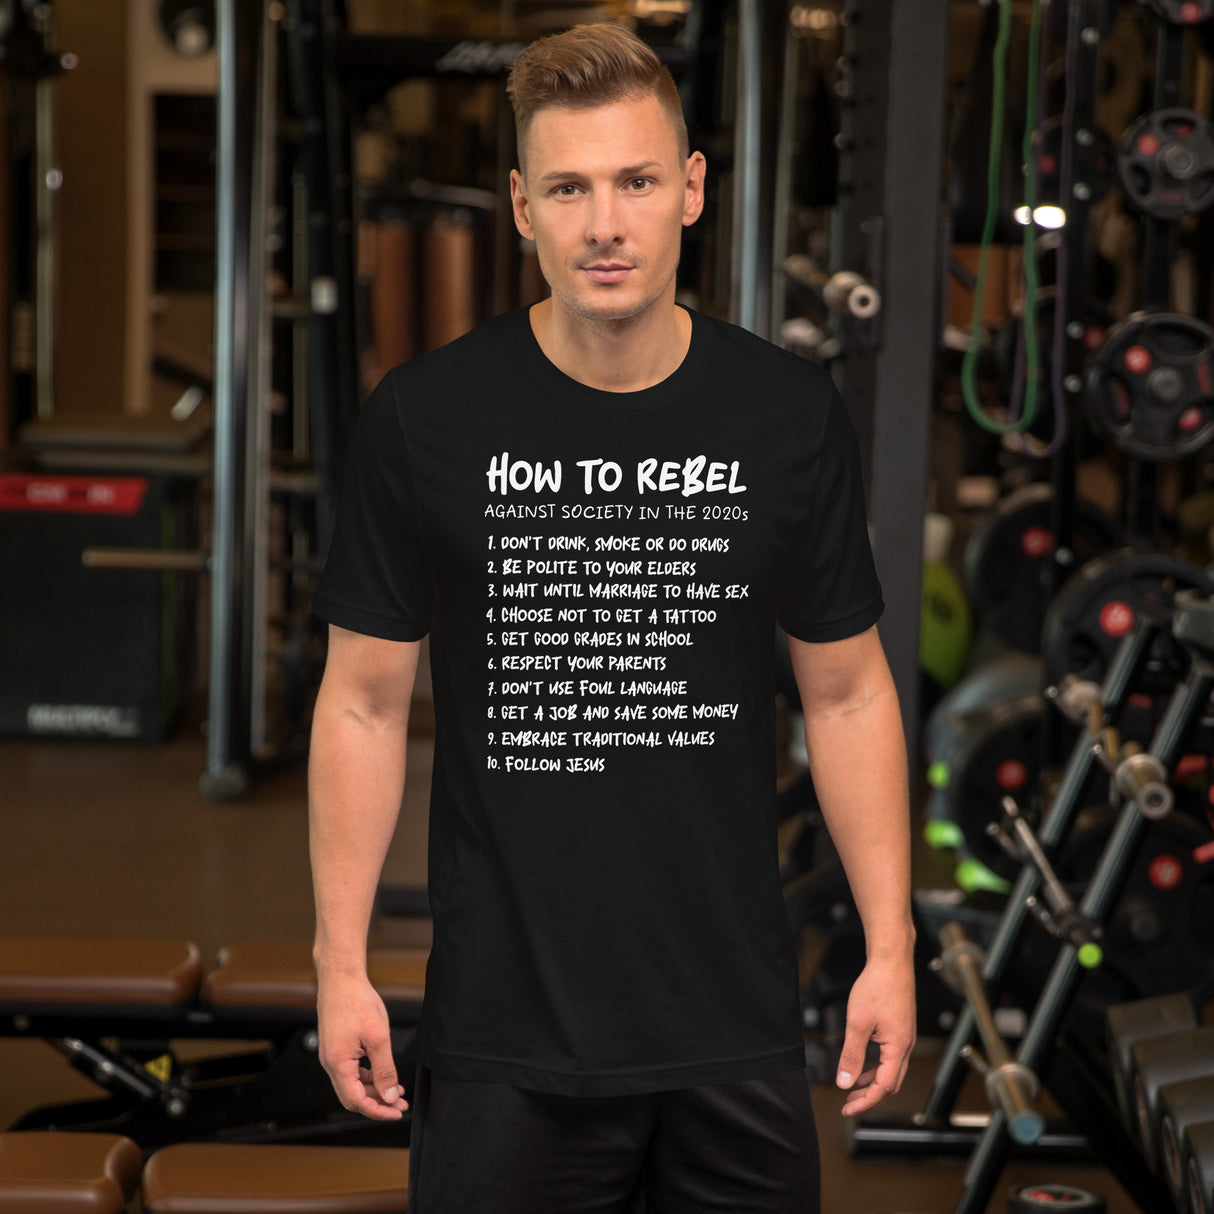 How To Rebel Against Society in The 2020s Men's Shirt